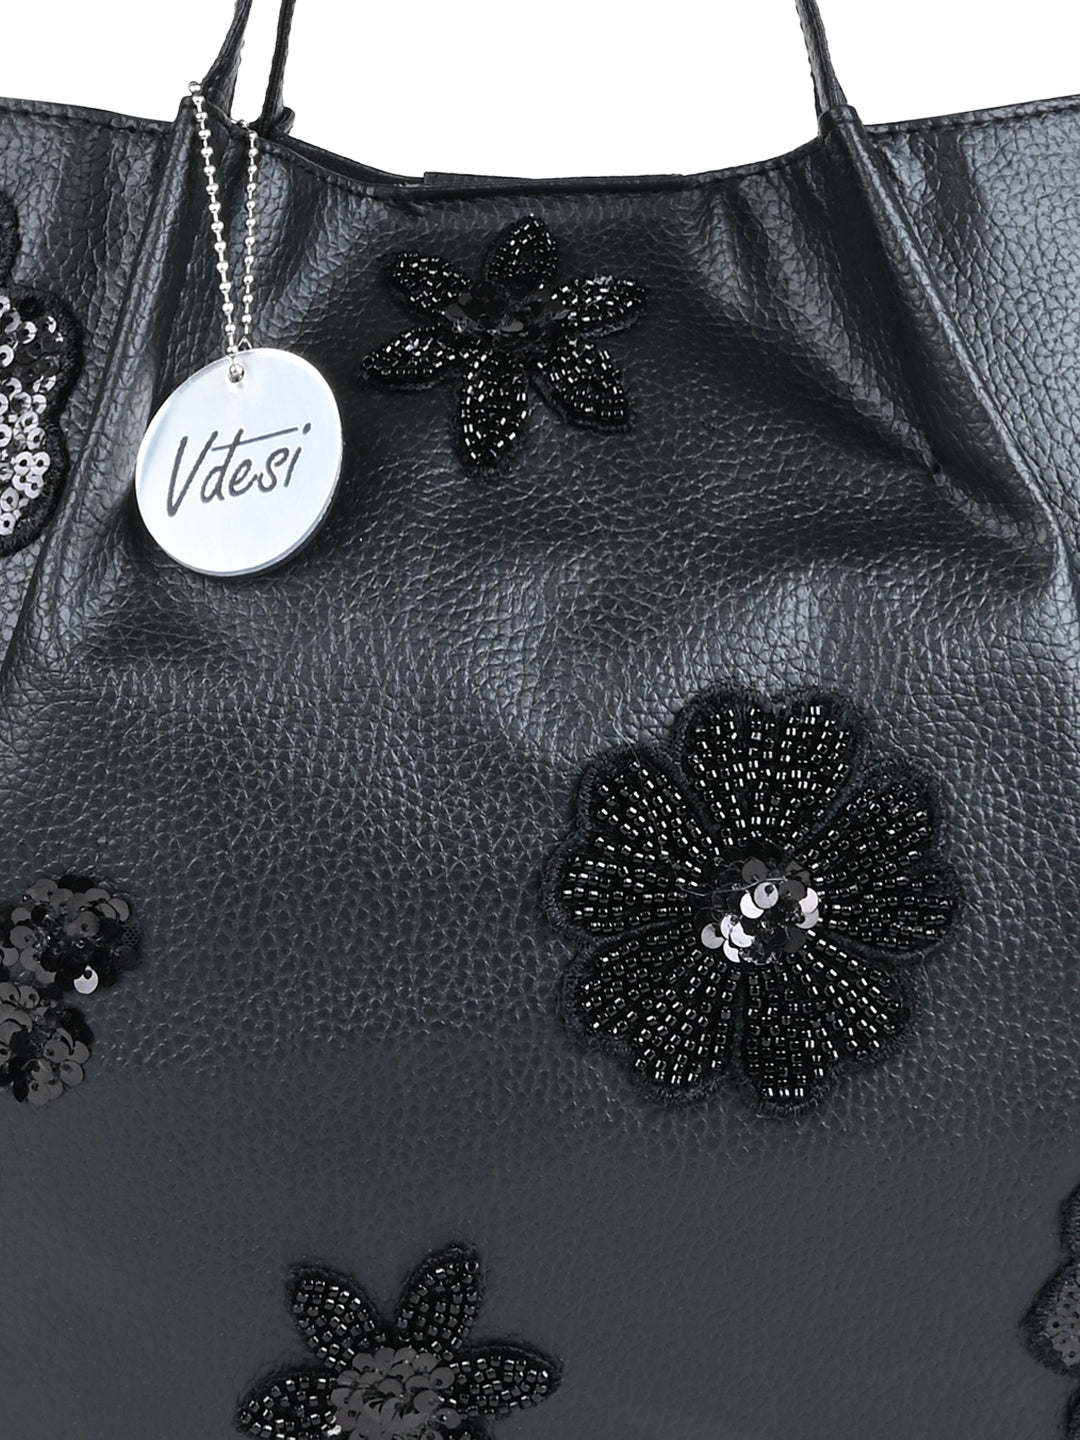 The bold yet delicate floral motif adds a touch of femininity, while the black canvas provides a chic contrast, making it a stylish complement to any ensemble.